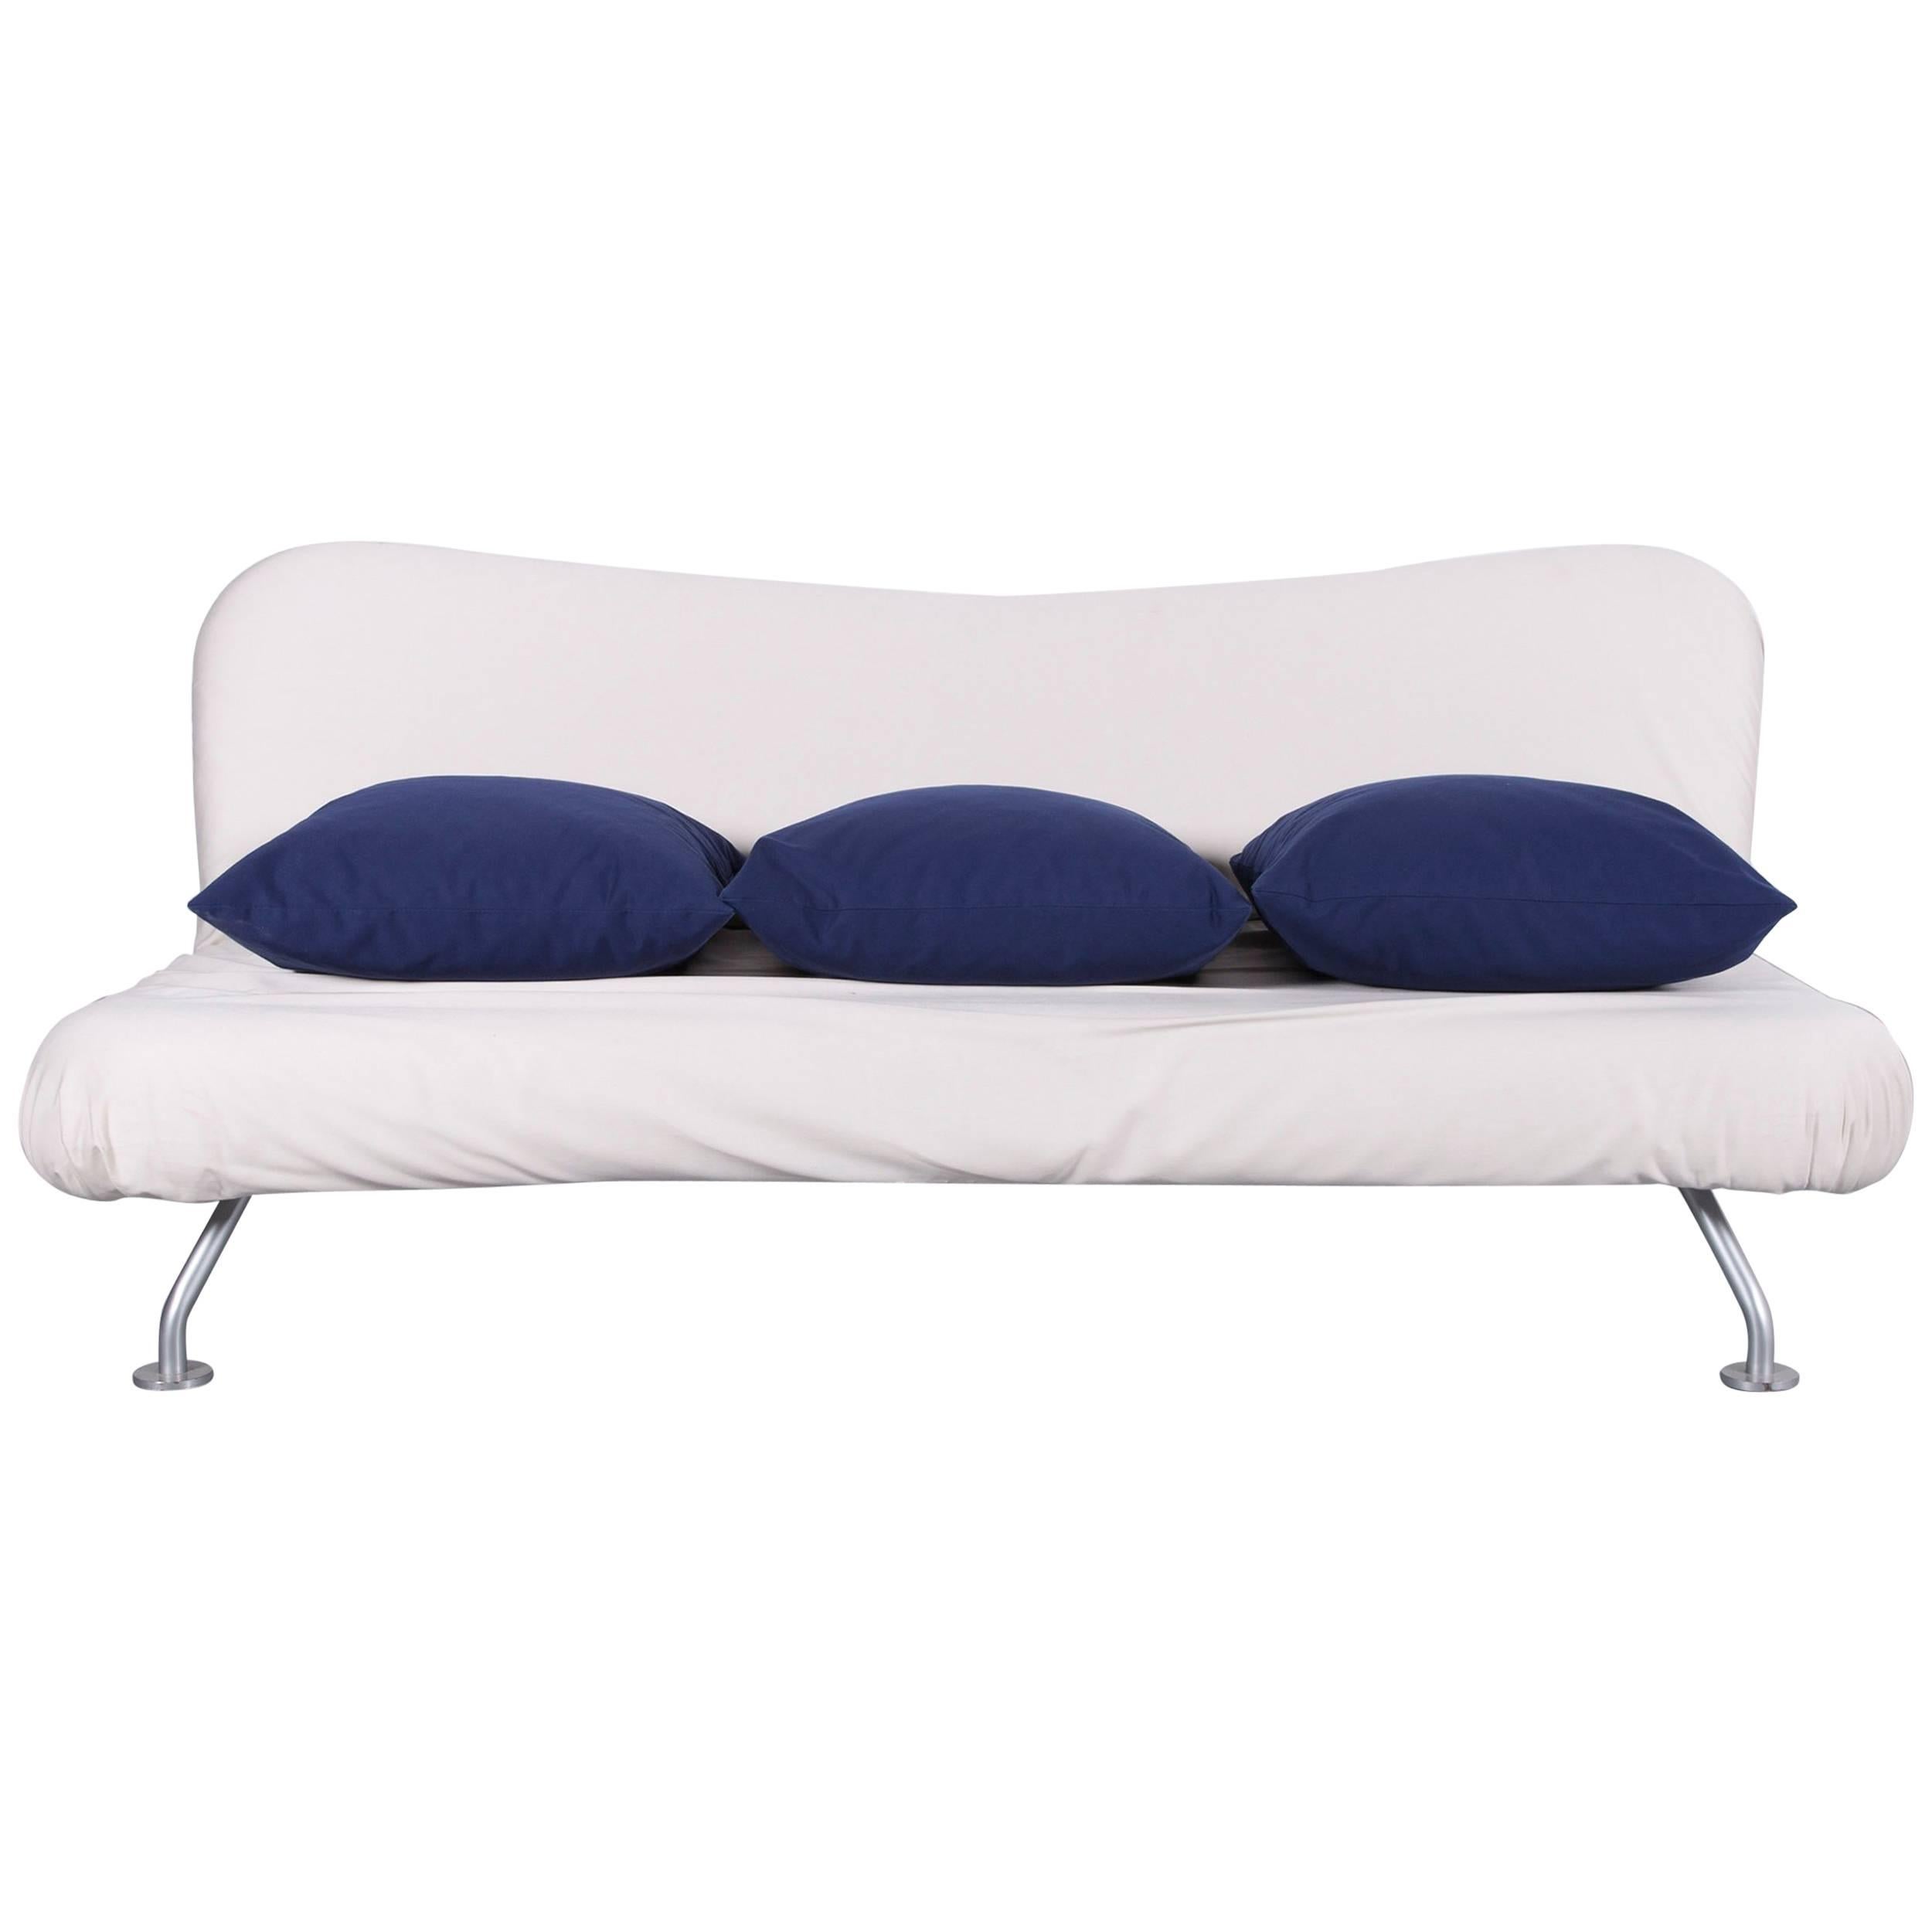 Brühl & Sippold More Bed-Sofa in White Fabric Couch For Sale